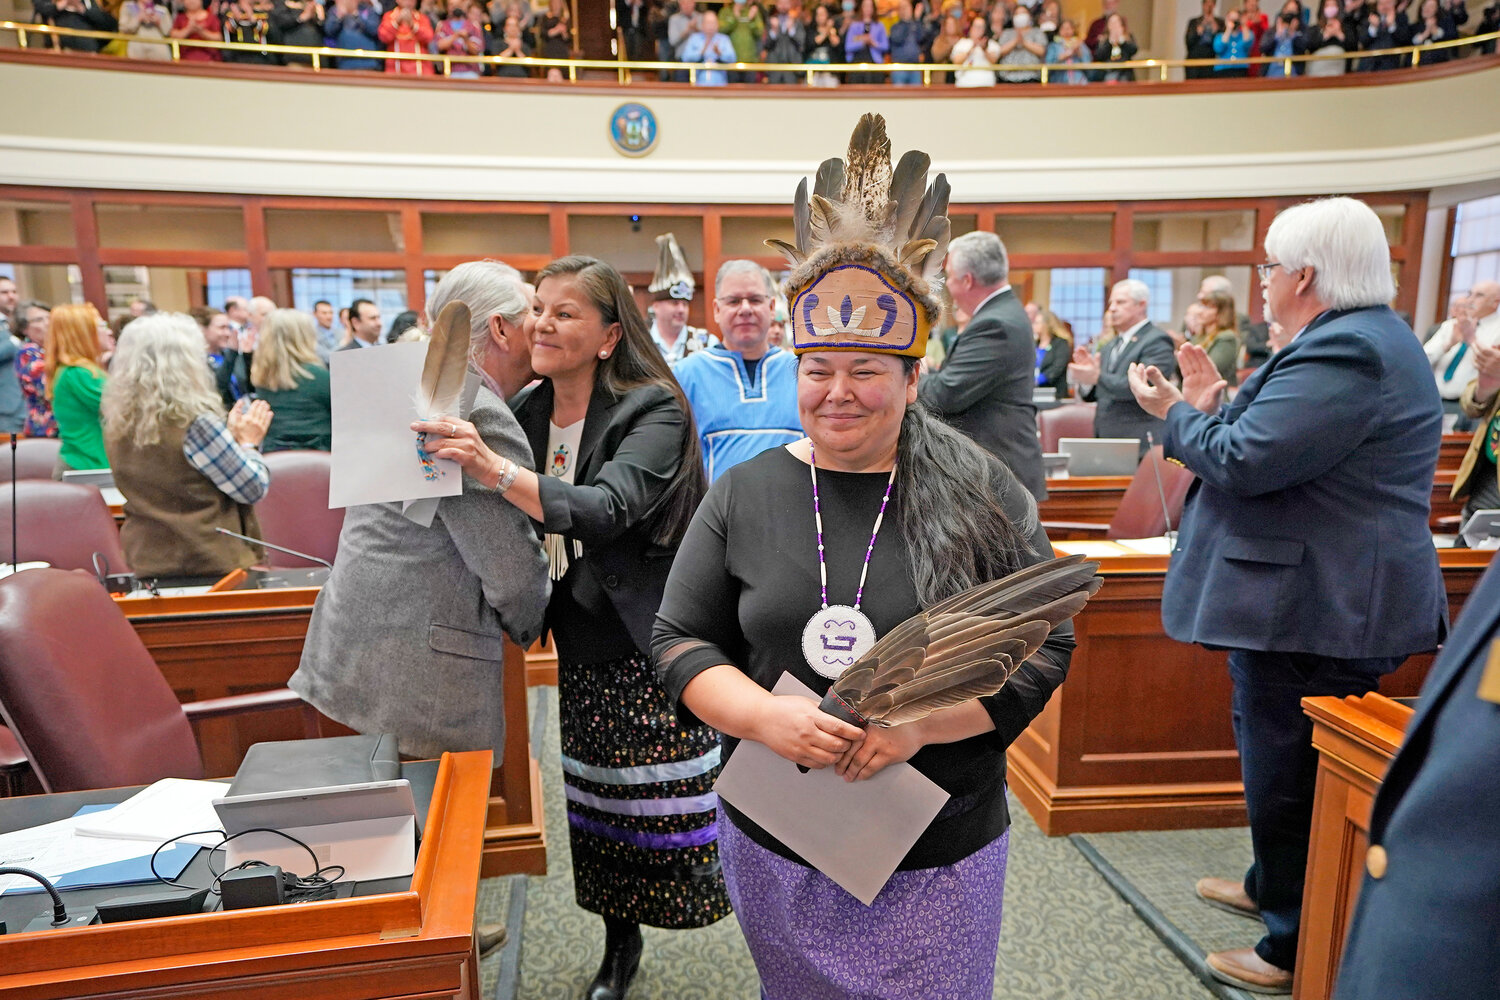 Clarissa Sabattis, Chief of the Houlton Band of Maliseets, foreground, and other leaders of Maine’s tribes are welcomed by lawmakers into the House Chamber, Wednesday, March 16, at the State House in Augusta, Maine.